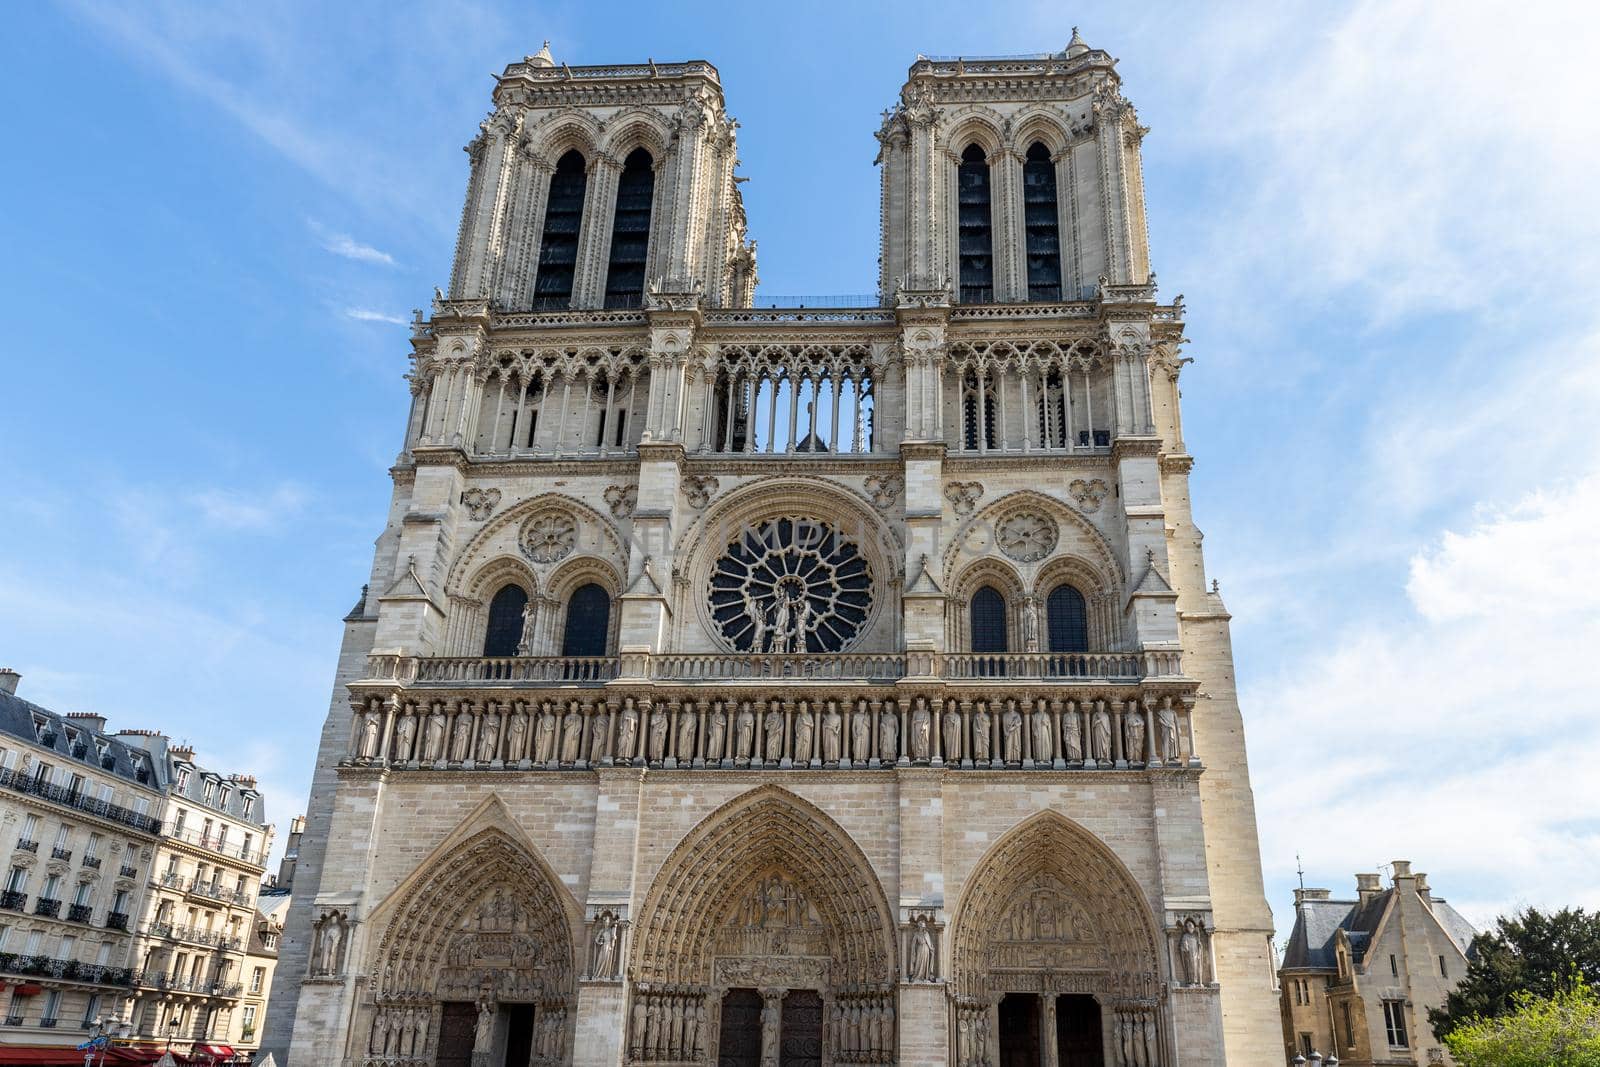 The front with two main towers of cathedral Notre Dame, Paris by reinerc